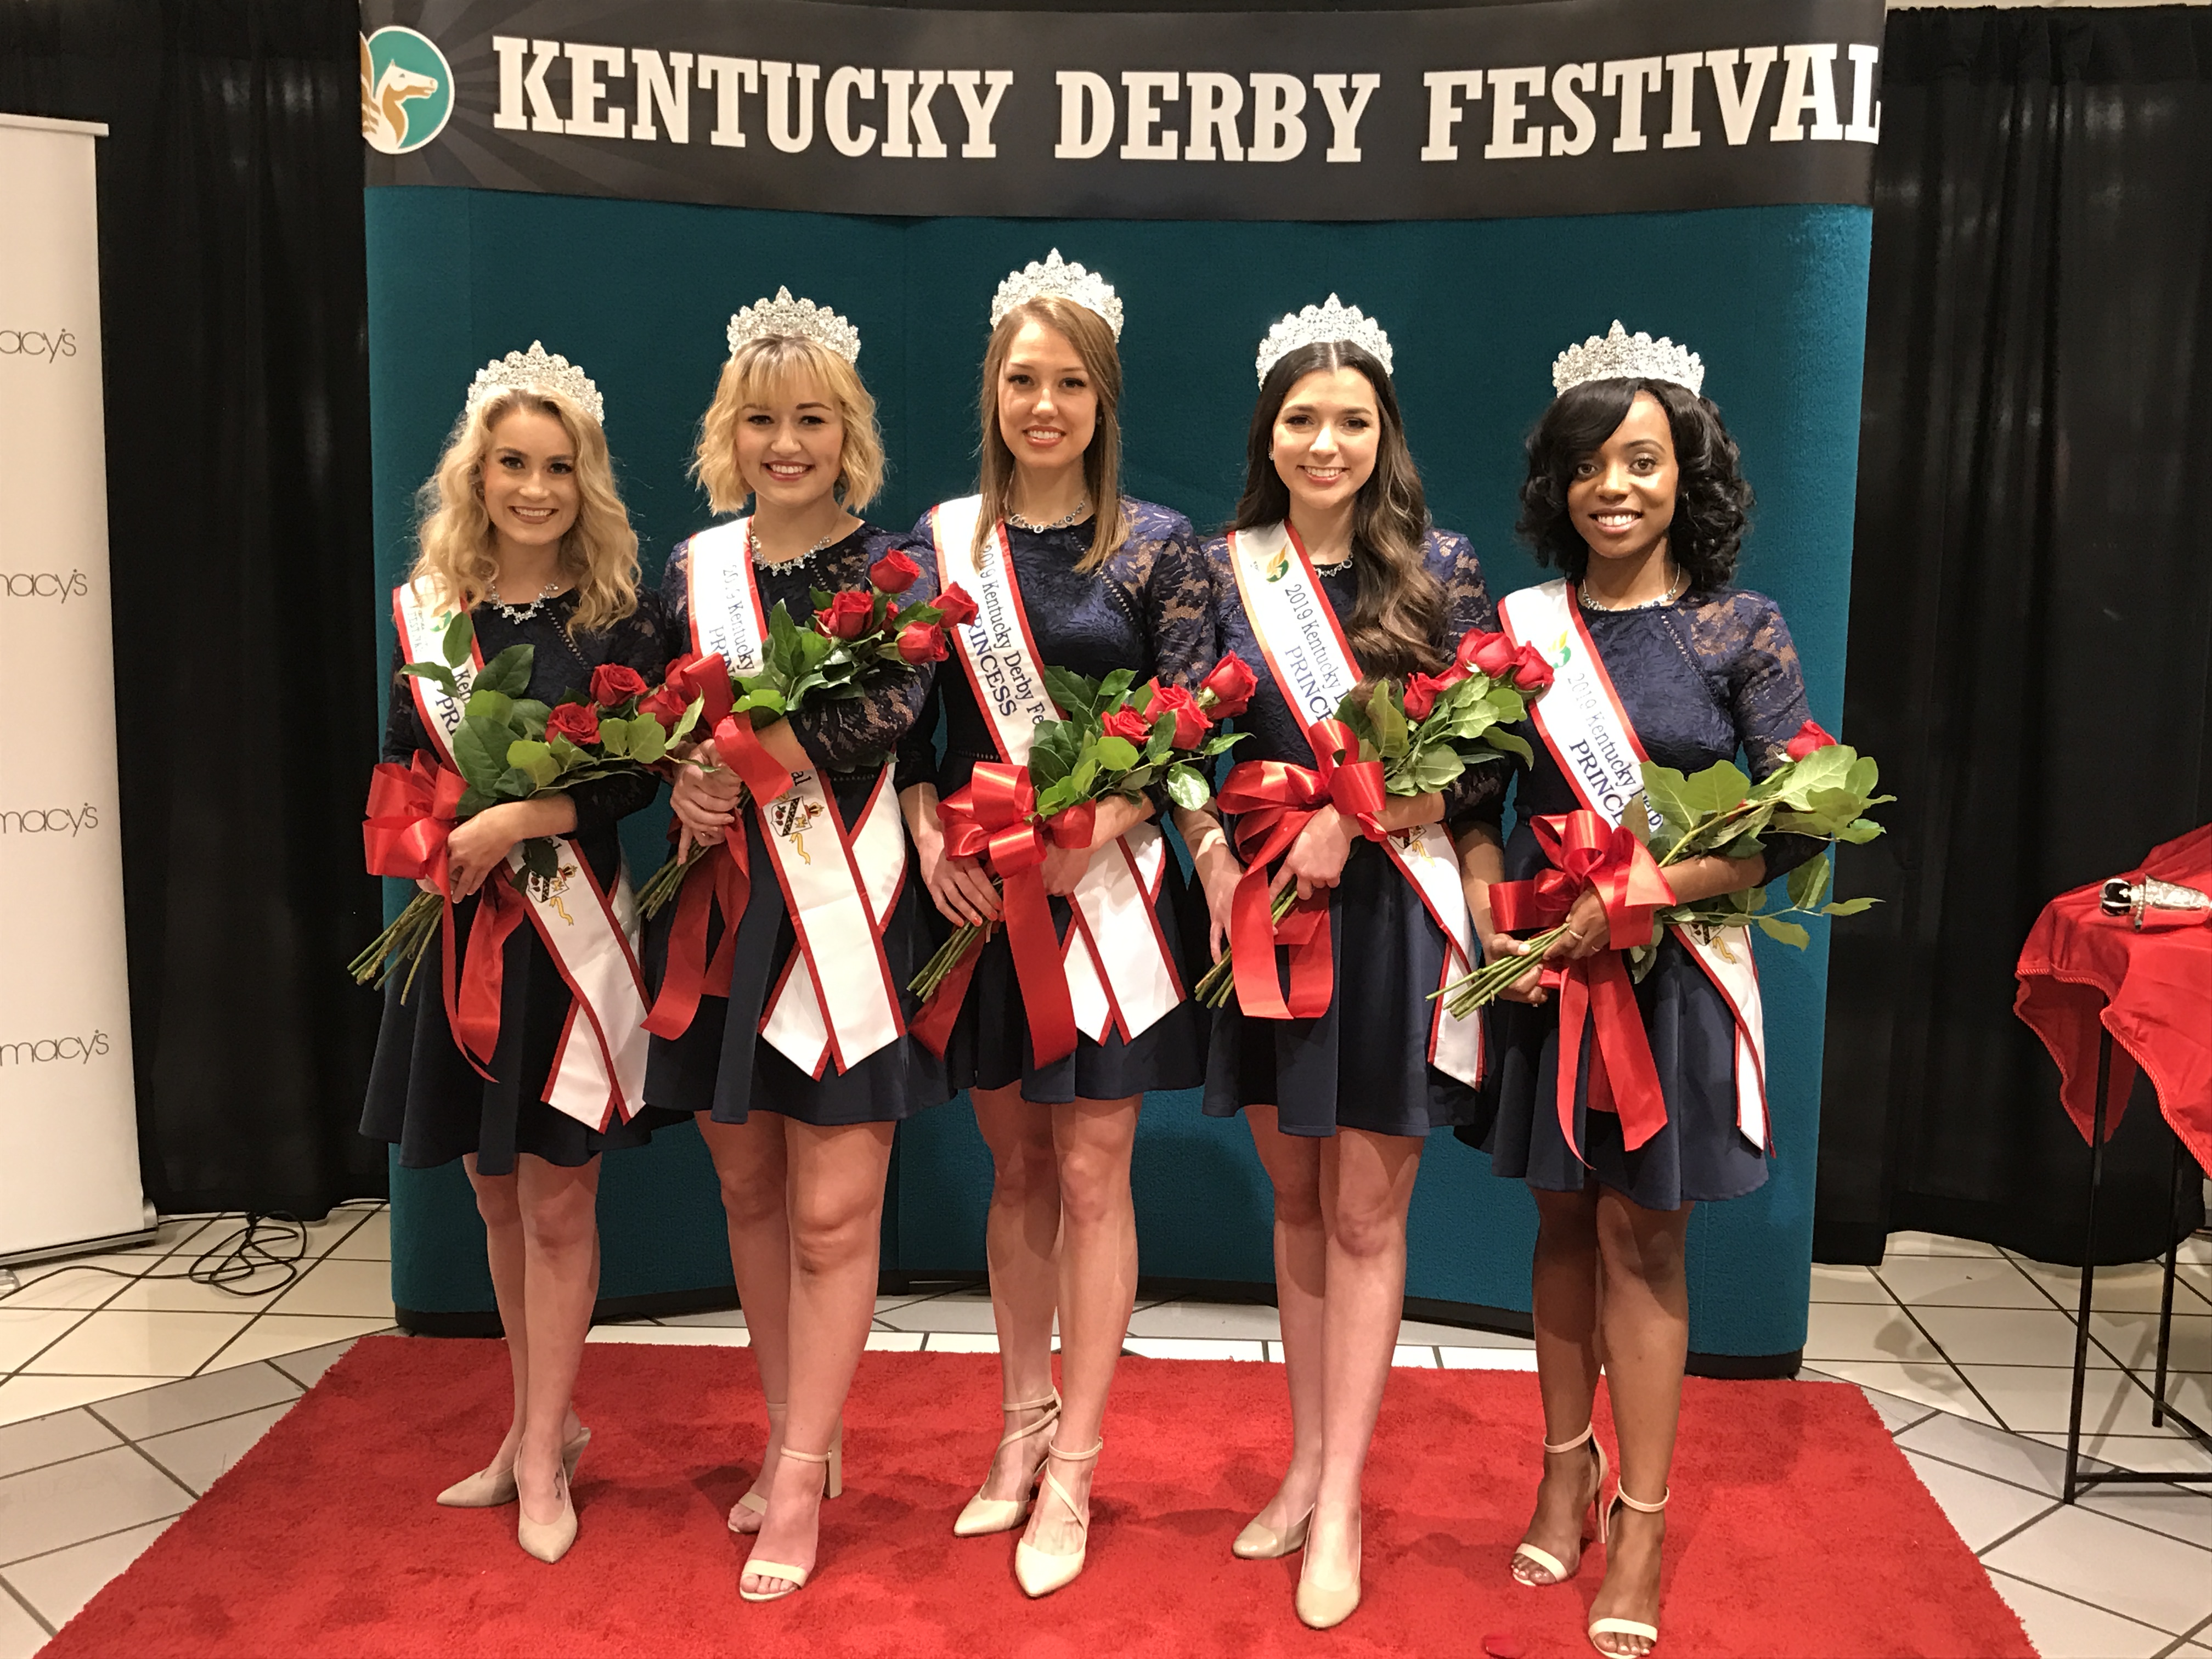 Pictured from left to right – Allison Spears, Kelsey Sutton, Elizabeth Seewer, Mary Baker, and Brittany Patillo.